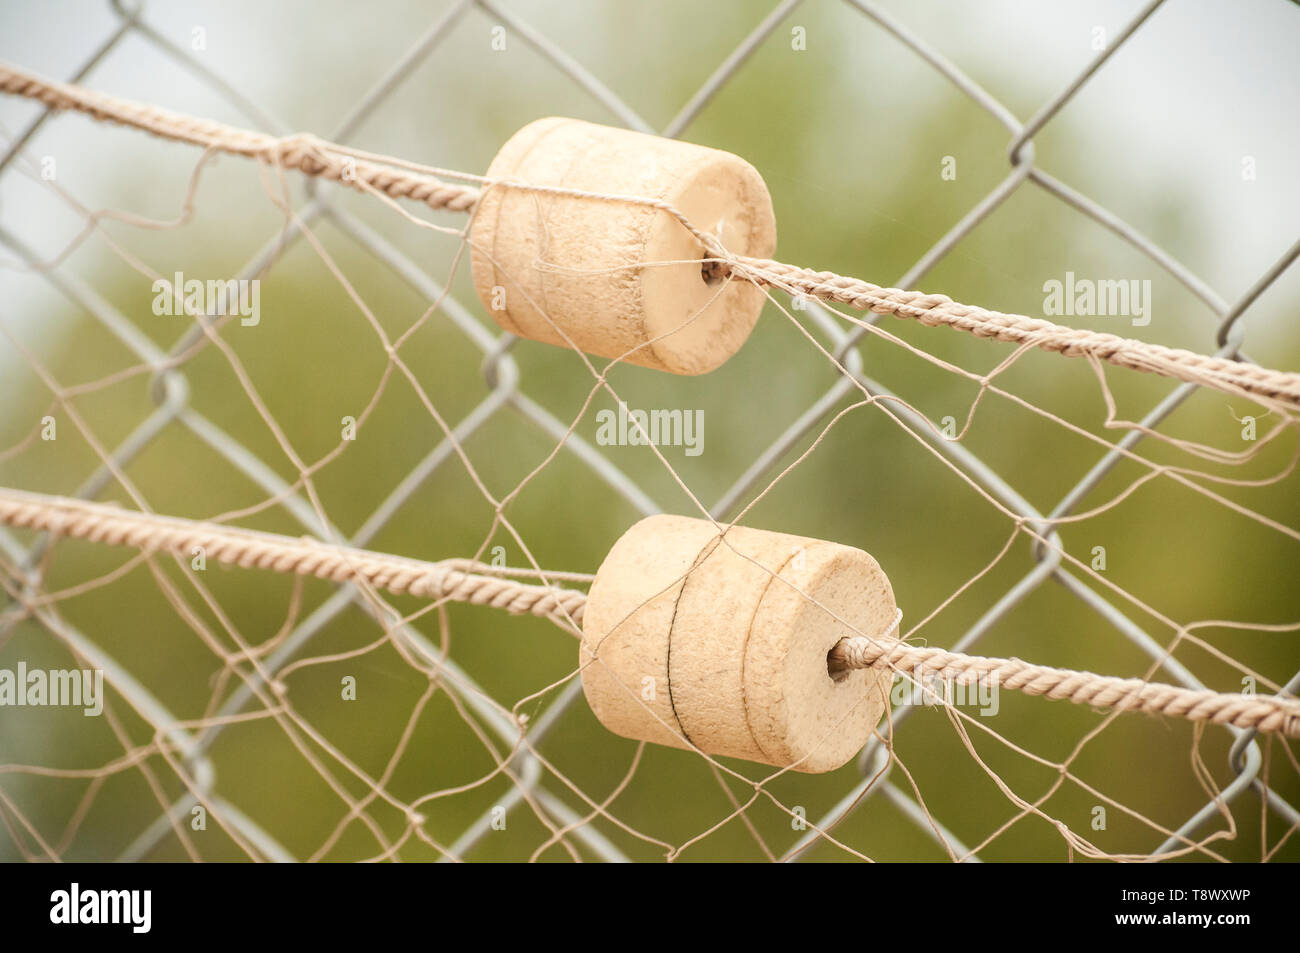 Fishing net with cork floats on wire mesh closeup as decorative background  Stock Photo - Alamy